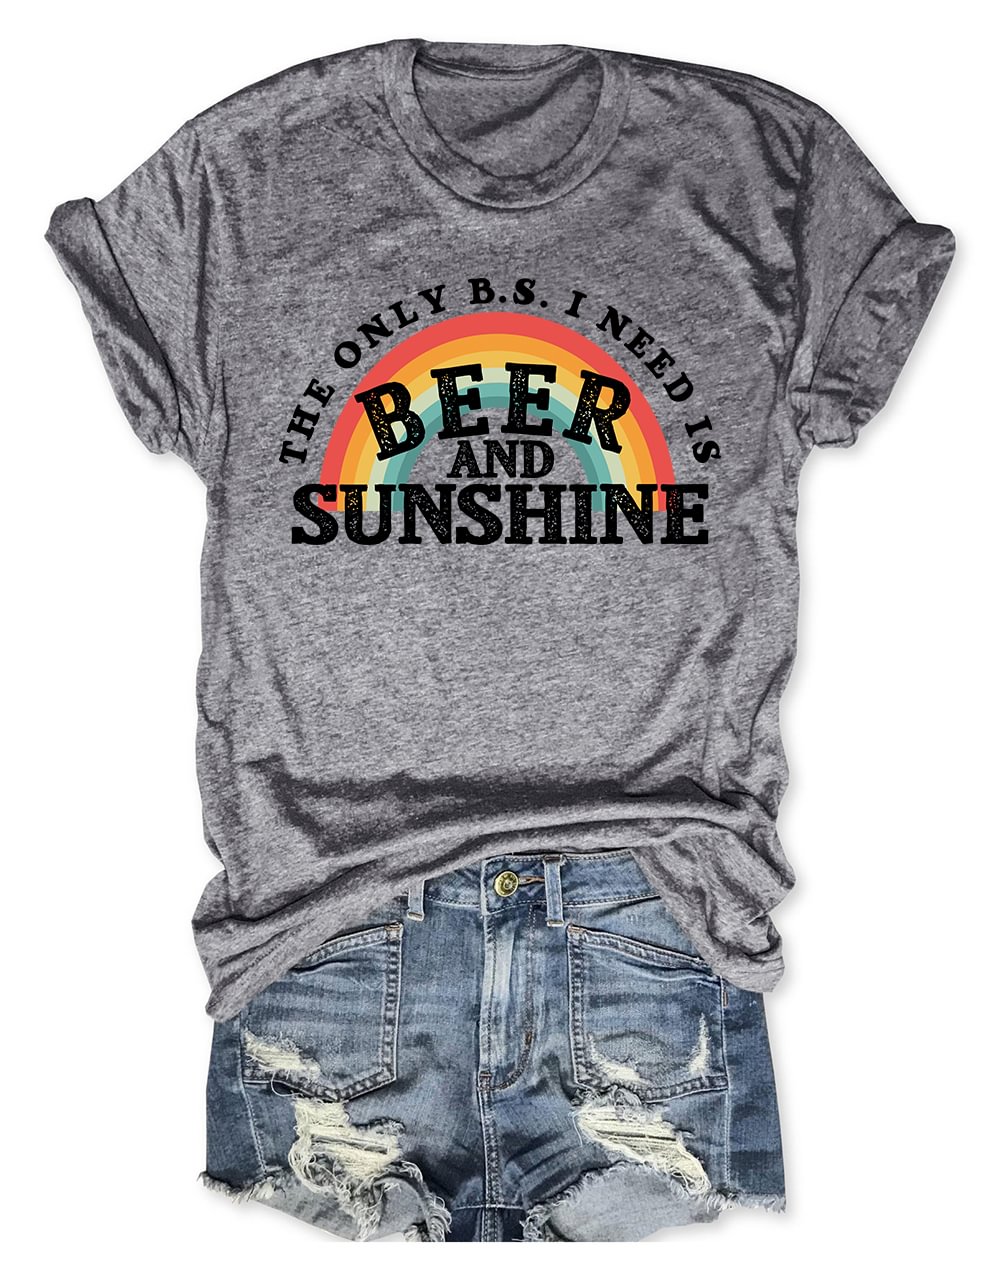 The Only B.S I Need Is Beer And Sunshine Rainbow T-Shirt